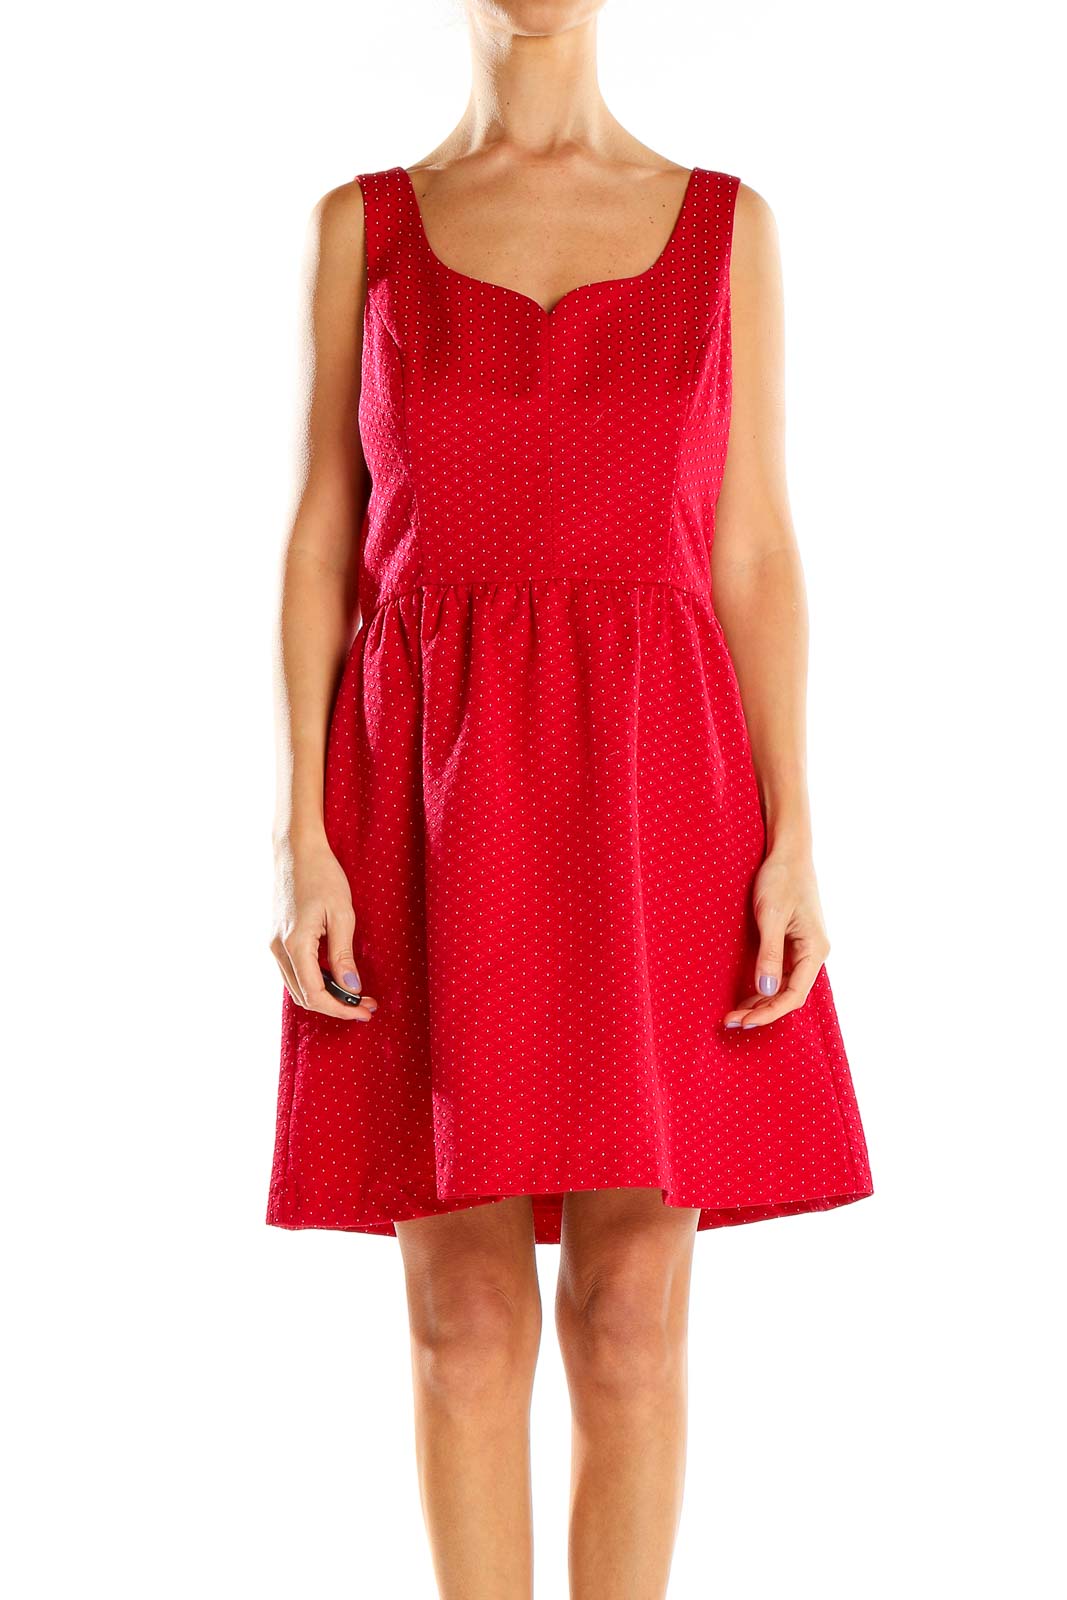 Red Polka Dot Fit & Flare Dress Front